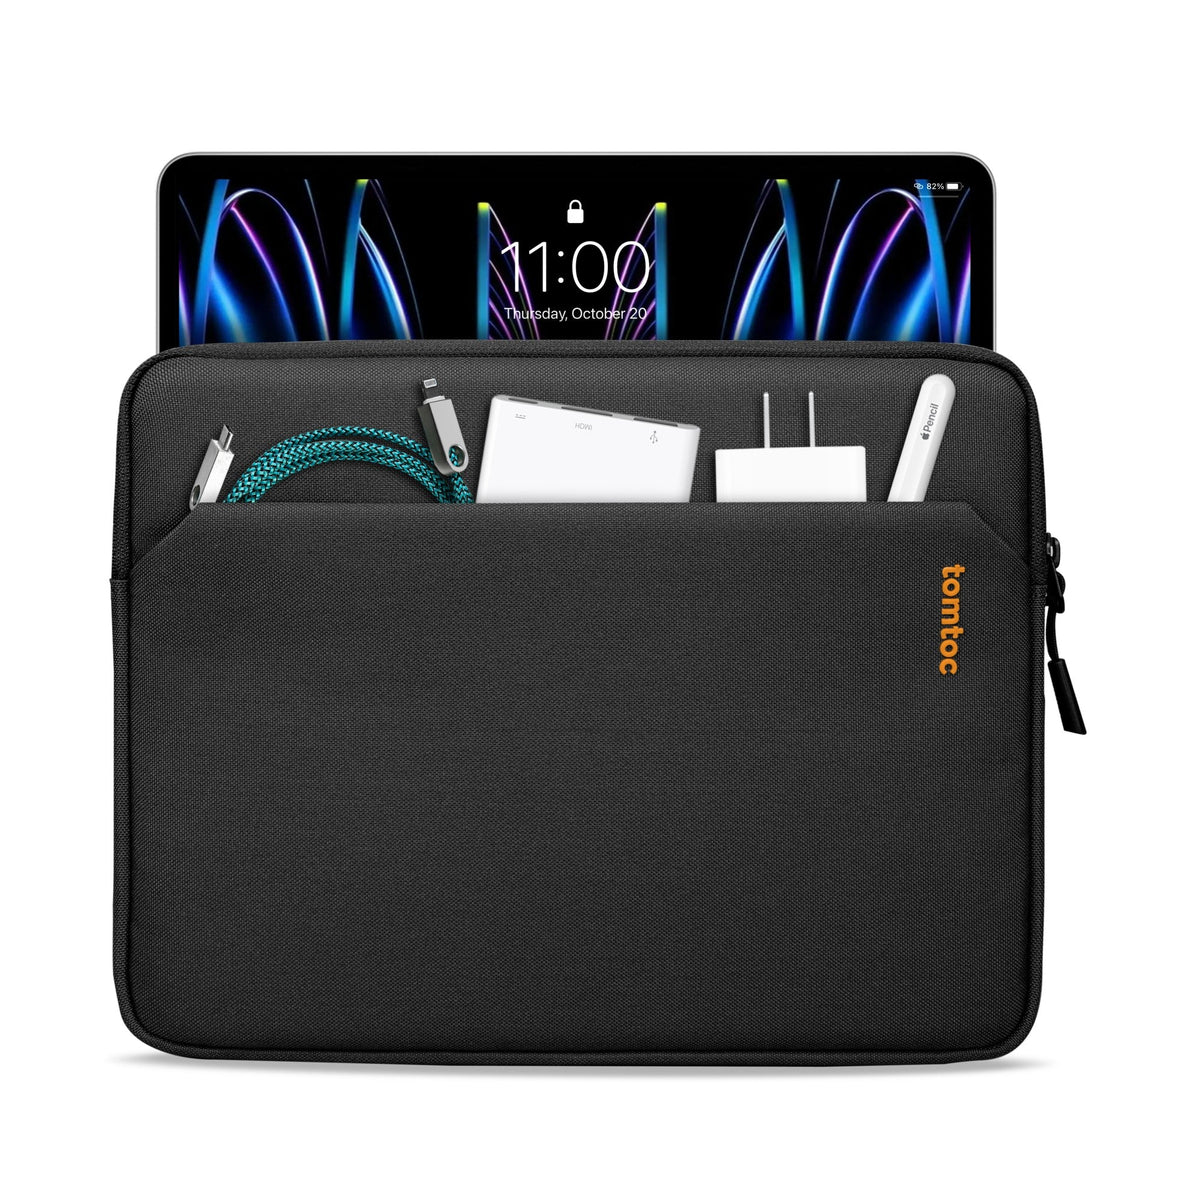 Light-B18 Tablet Sleeve for 11-inch iPad Air/Pro M4/M2